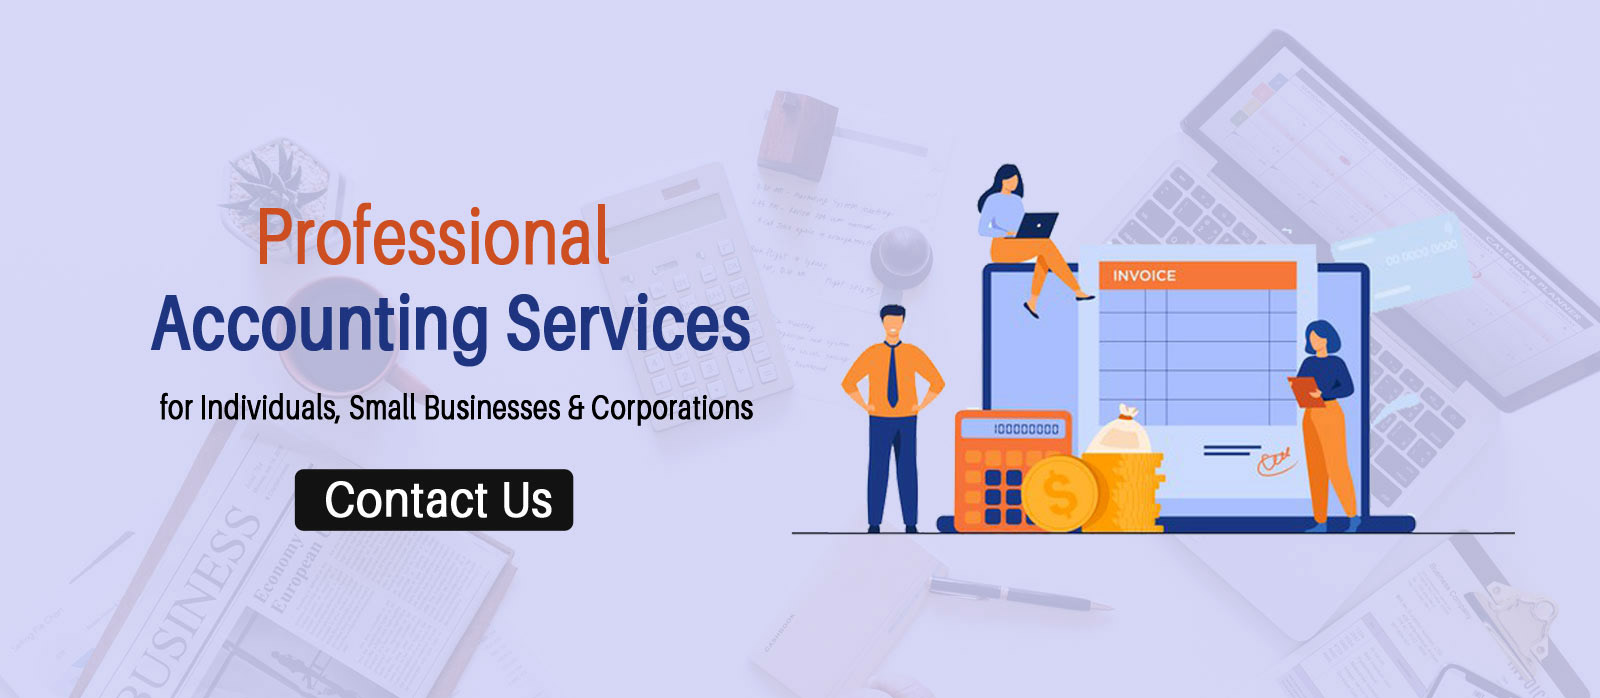 Accounting Services in Gurgaon